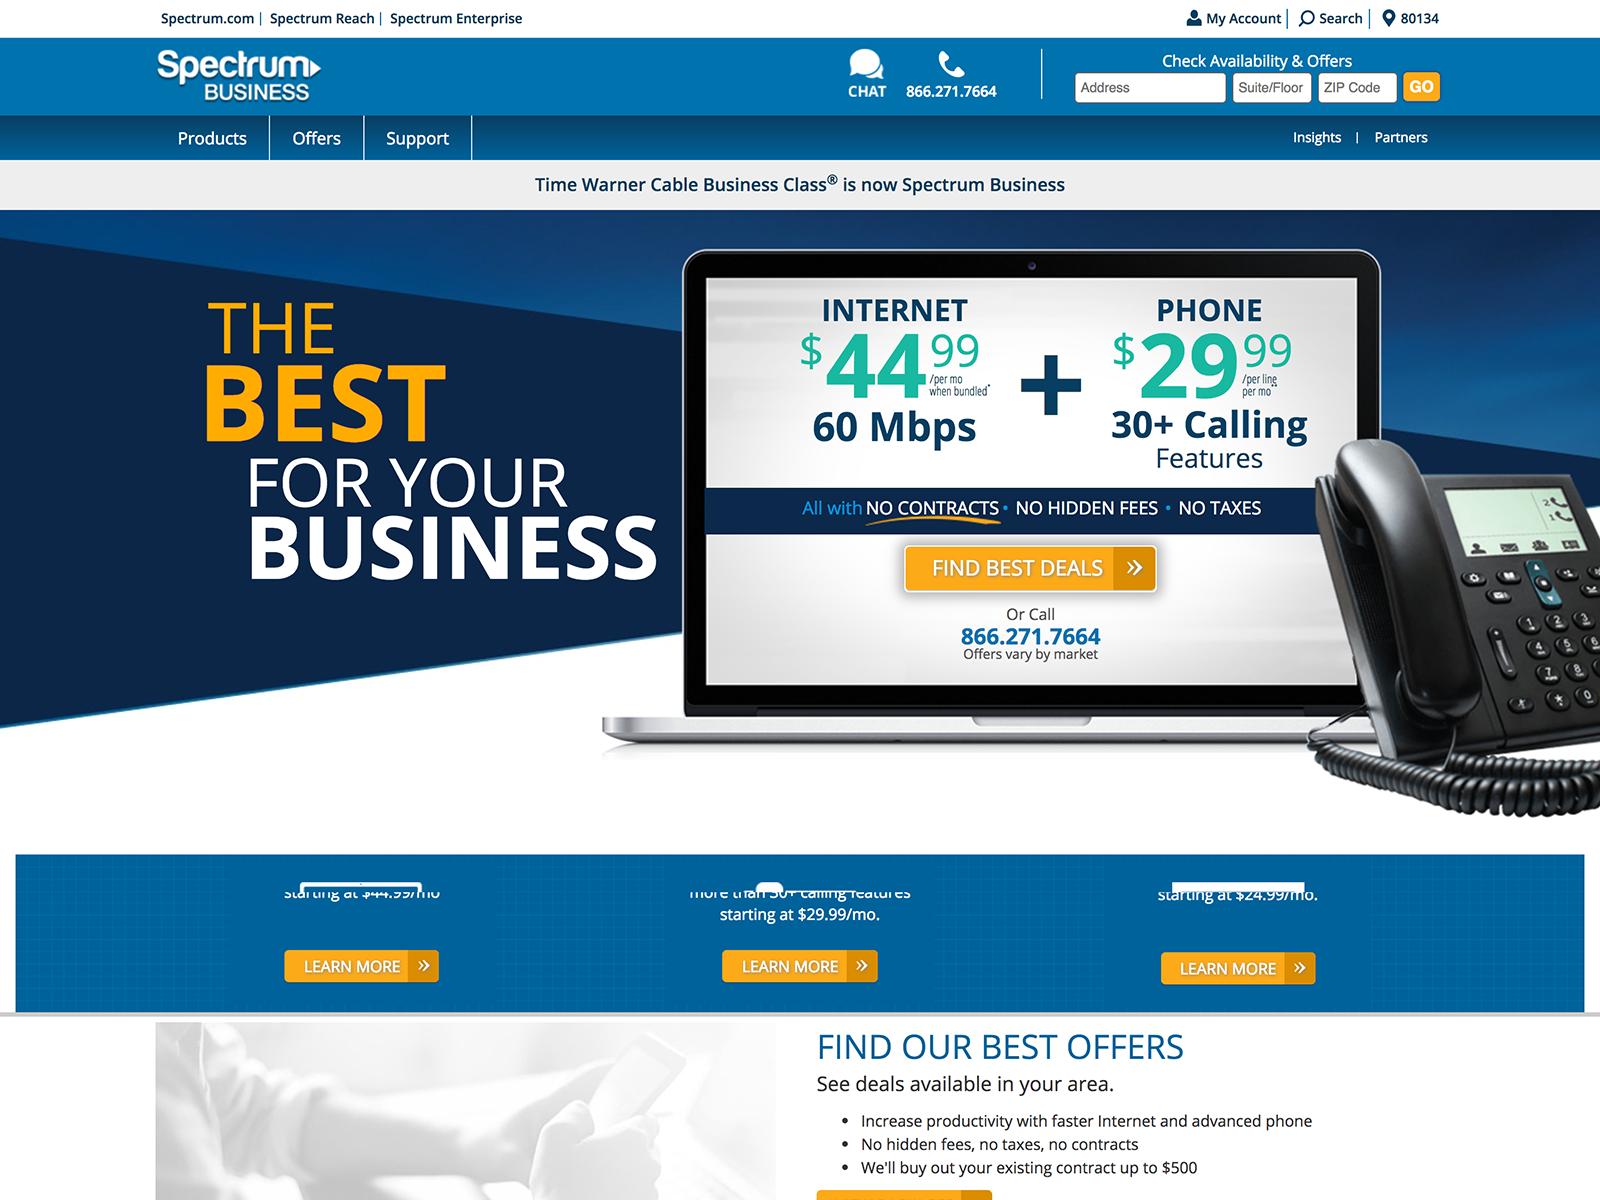 Time Warner Cable<br><span style="font-size:10px">Now Spectrum/Charter Communications</span>